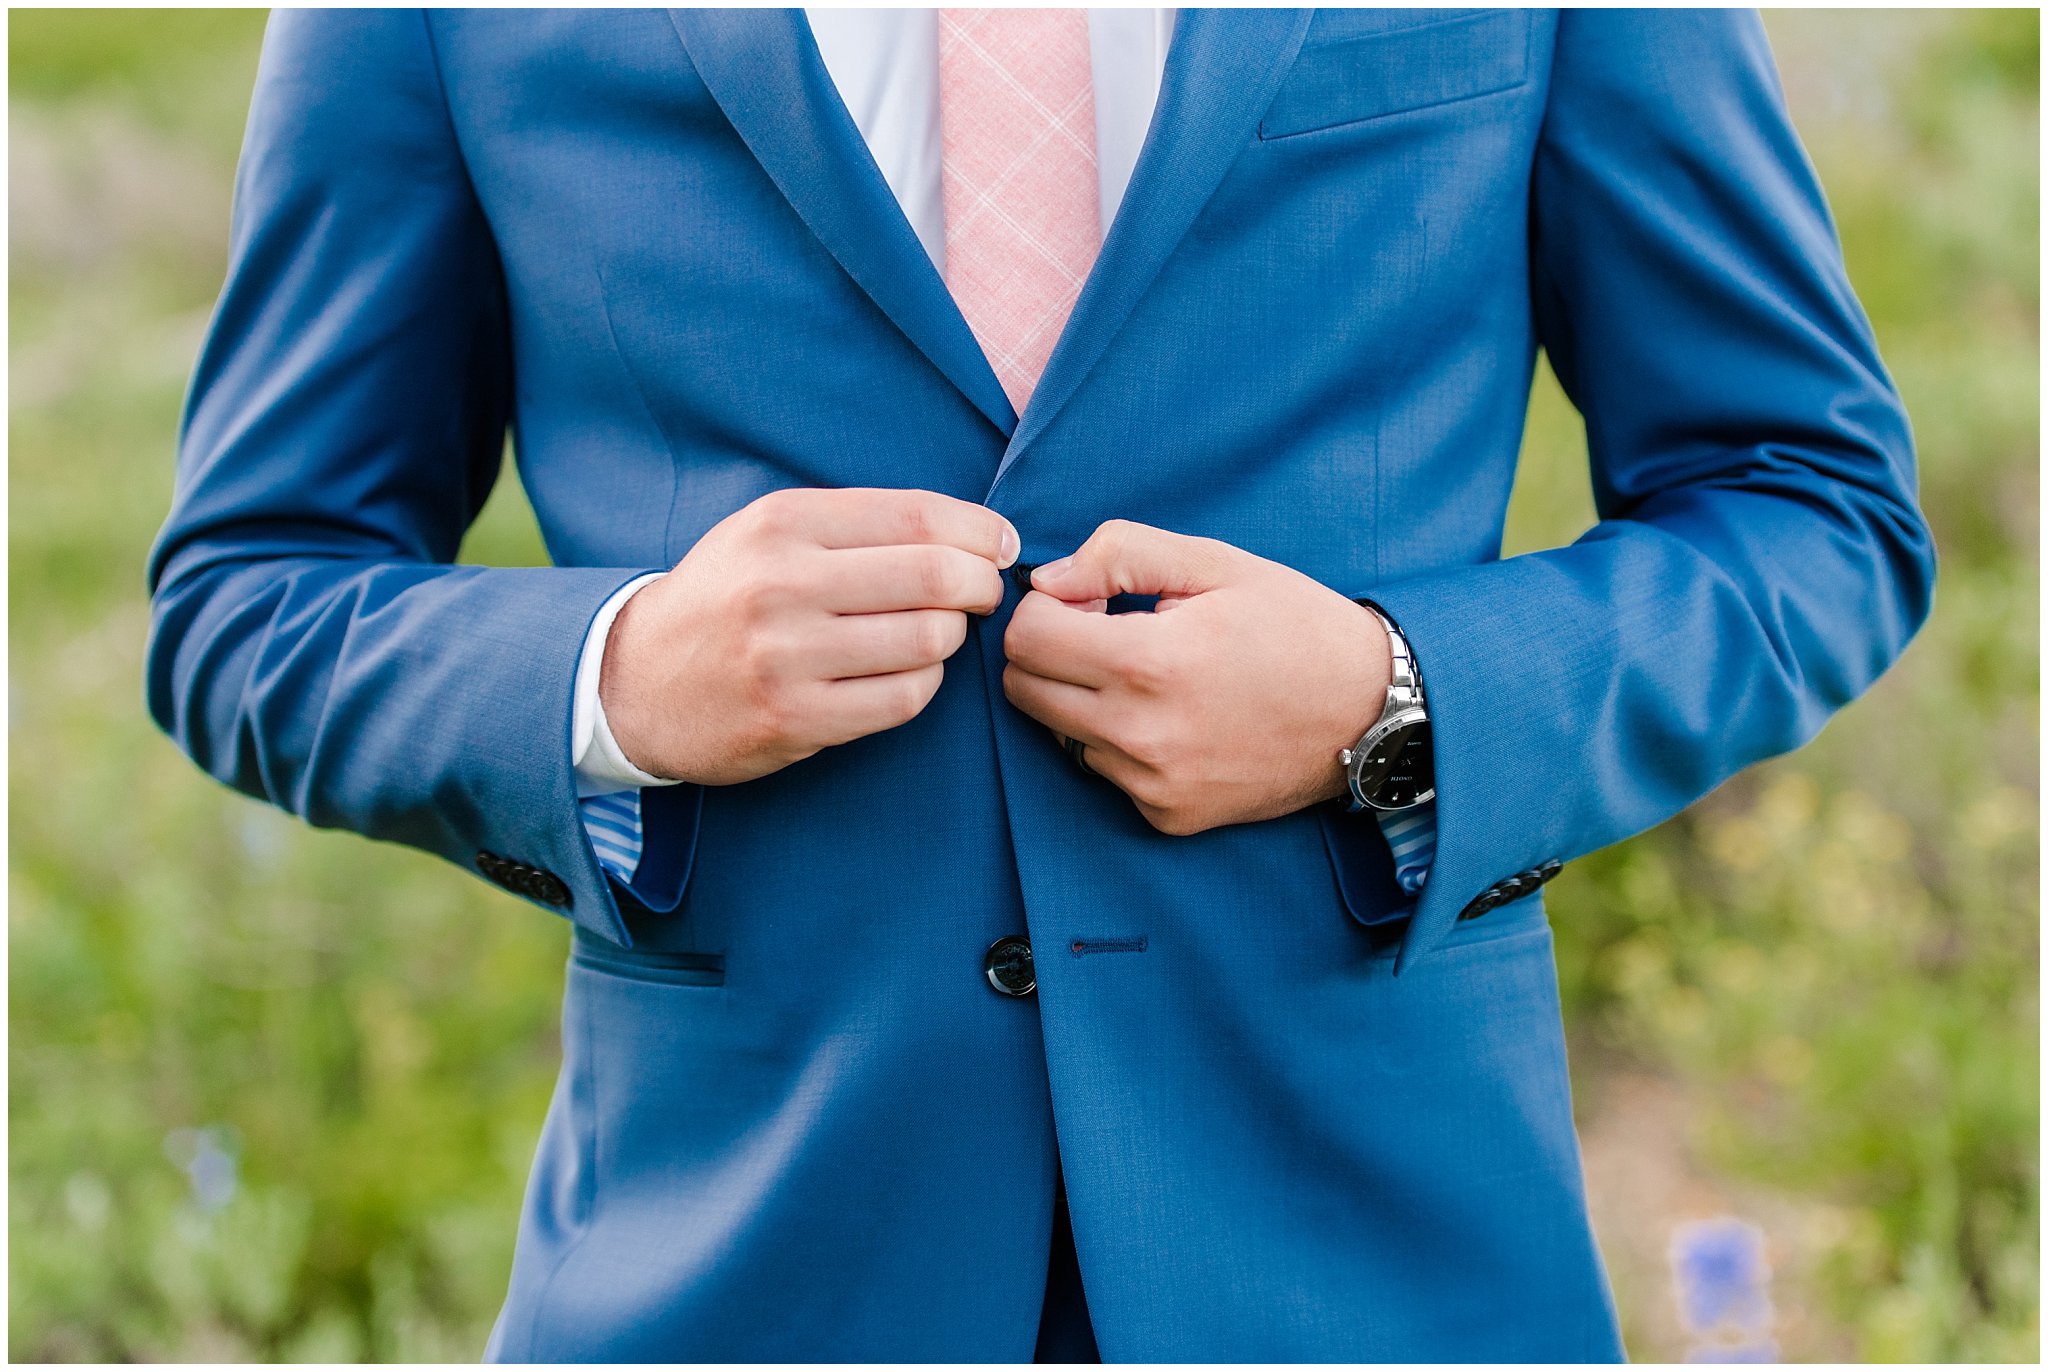 Groom in the Utah mountains wearing cornish blue suit | Summer Mountain wildflowers | Tony Grove Summer Formal Session | Jessie and Dallin Photography